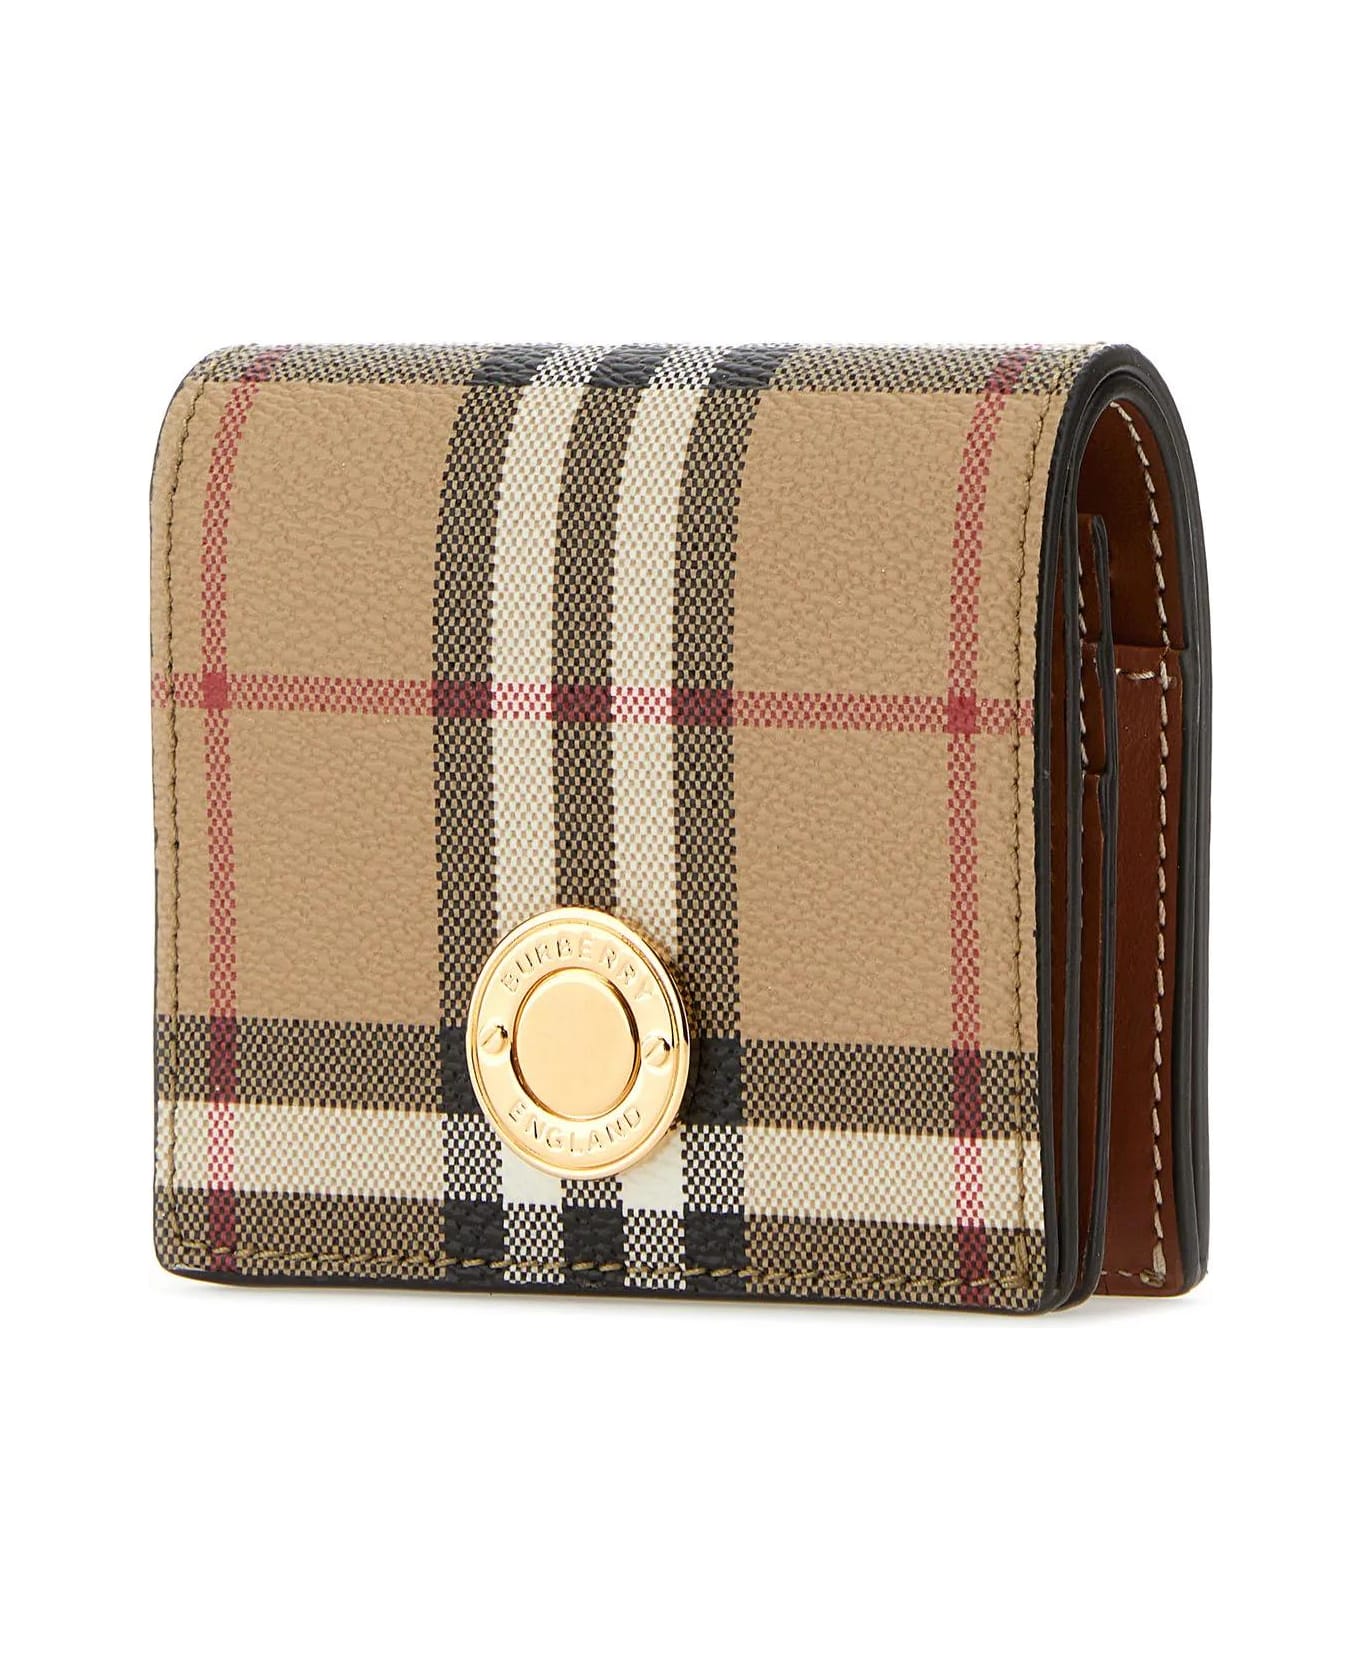 Burberry Printed Canvas Small Wallet - Beige